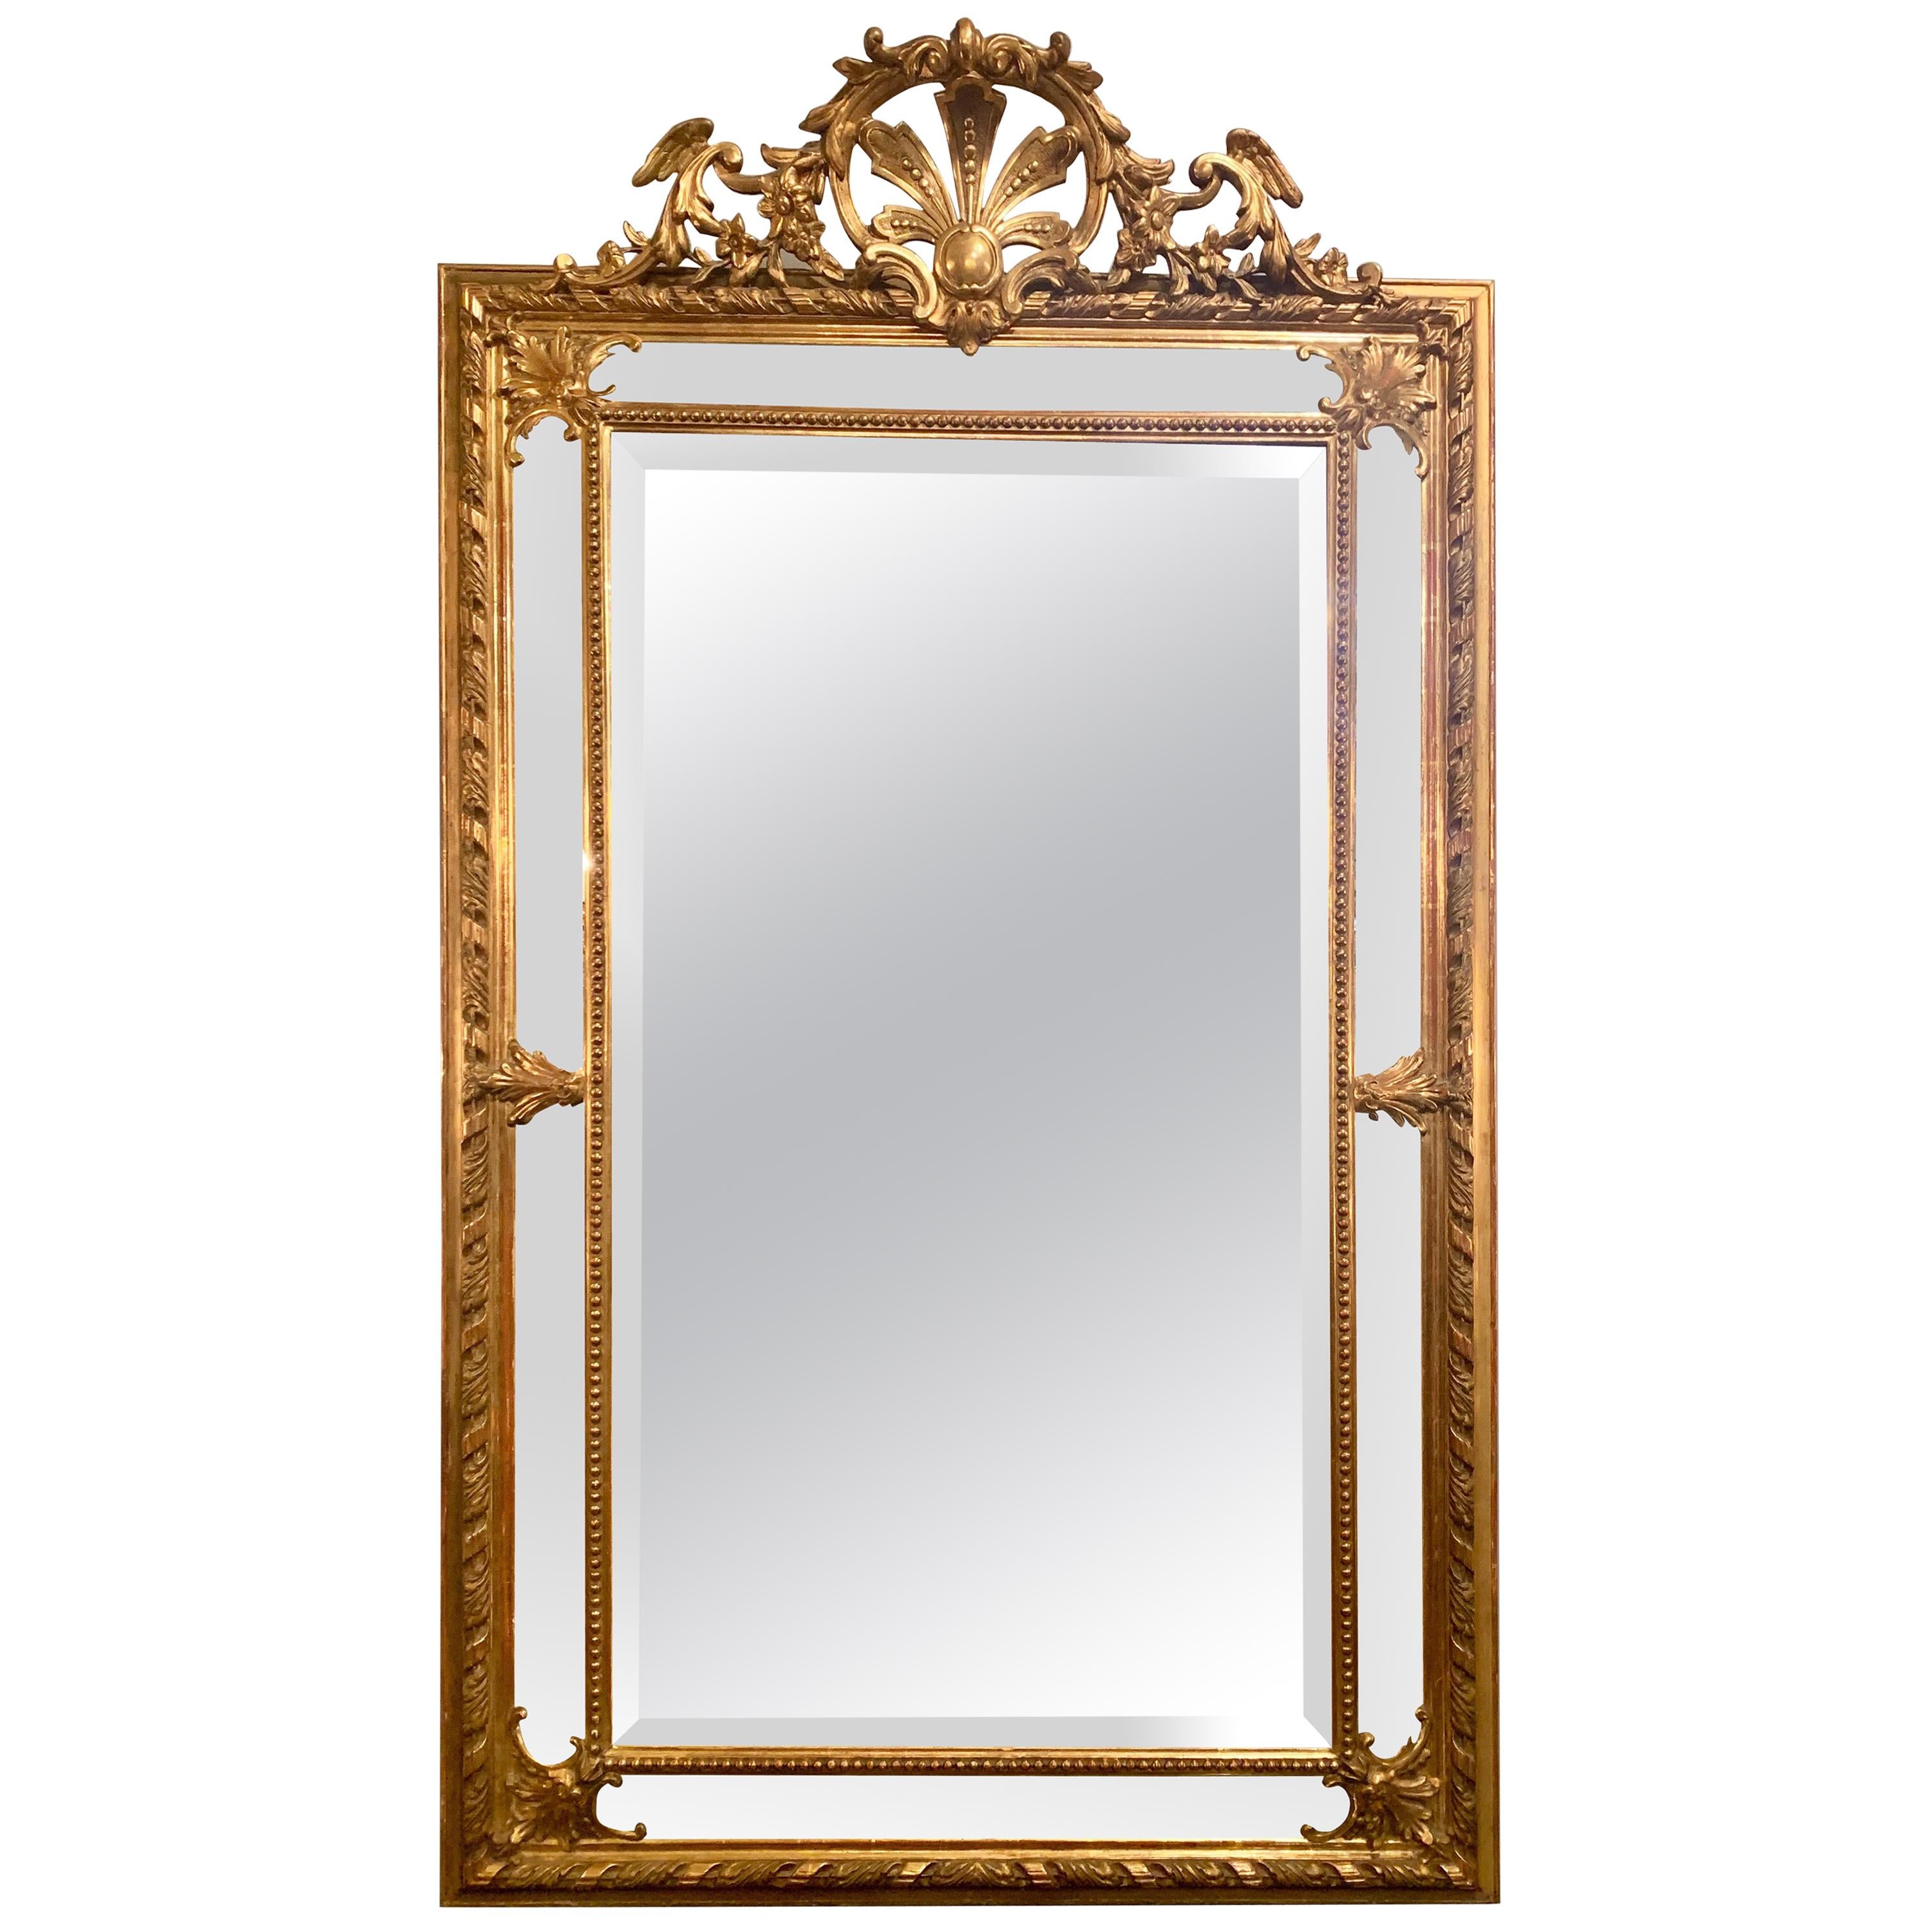 Antique French Very Fine Quality Gold-Leaf Beveled Mirror, circa 1865-1885